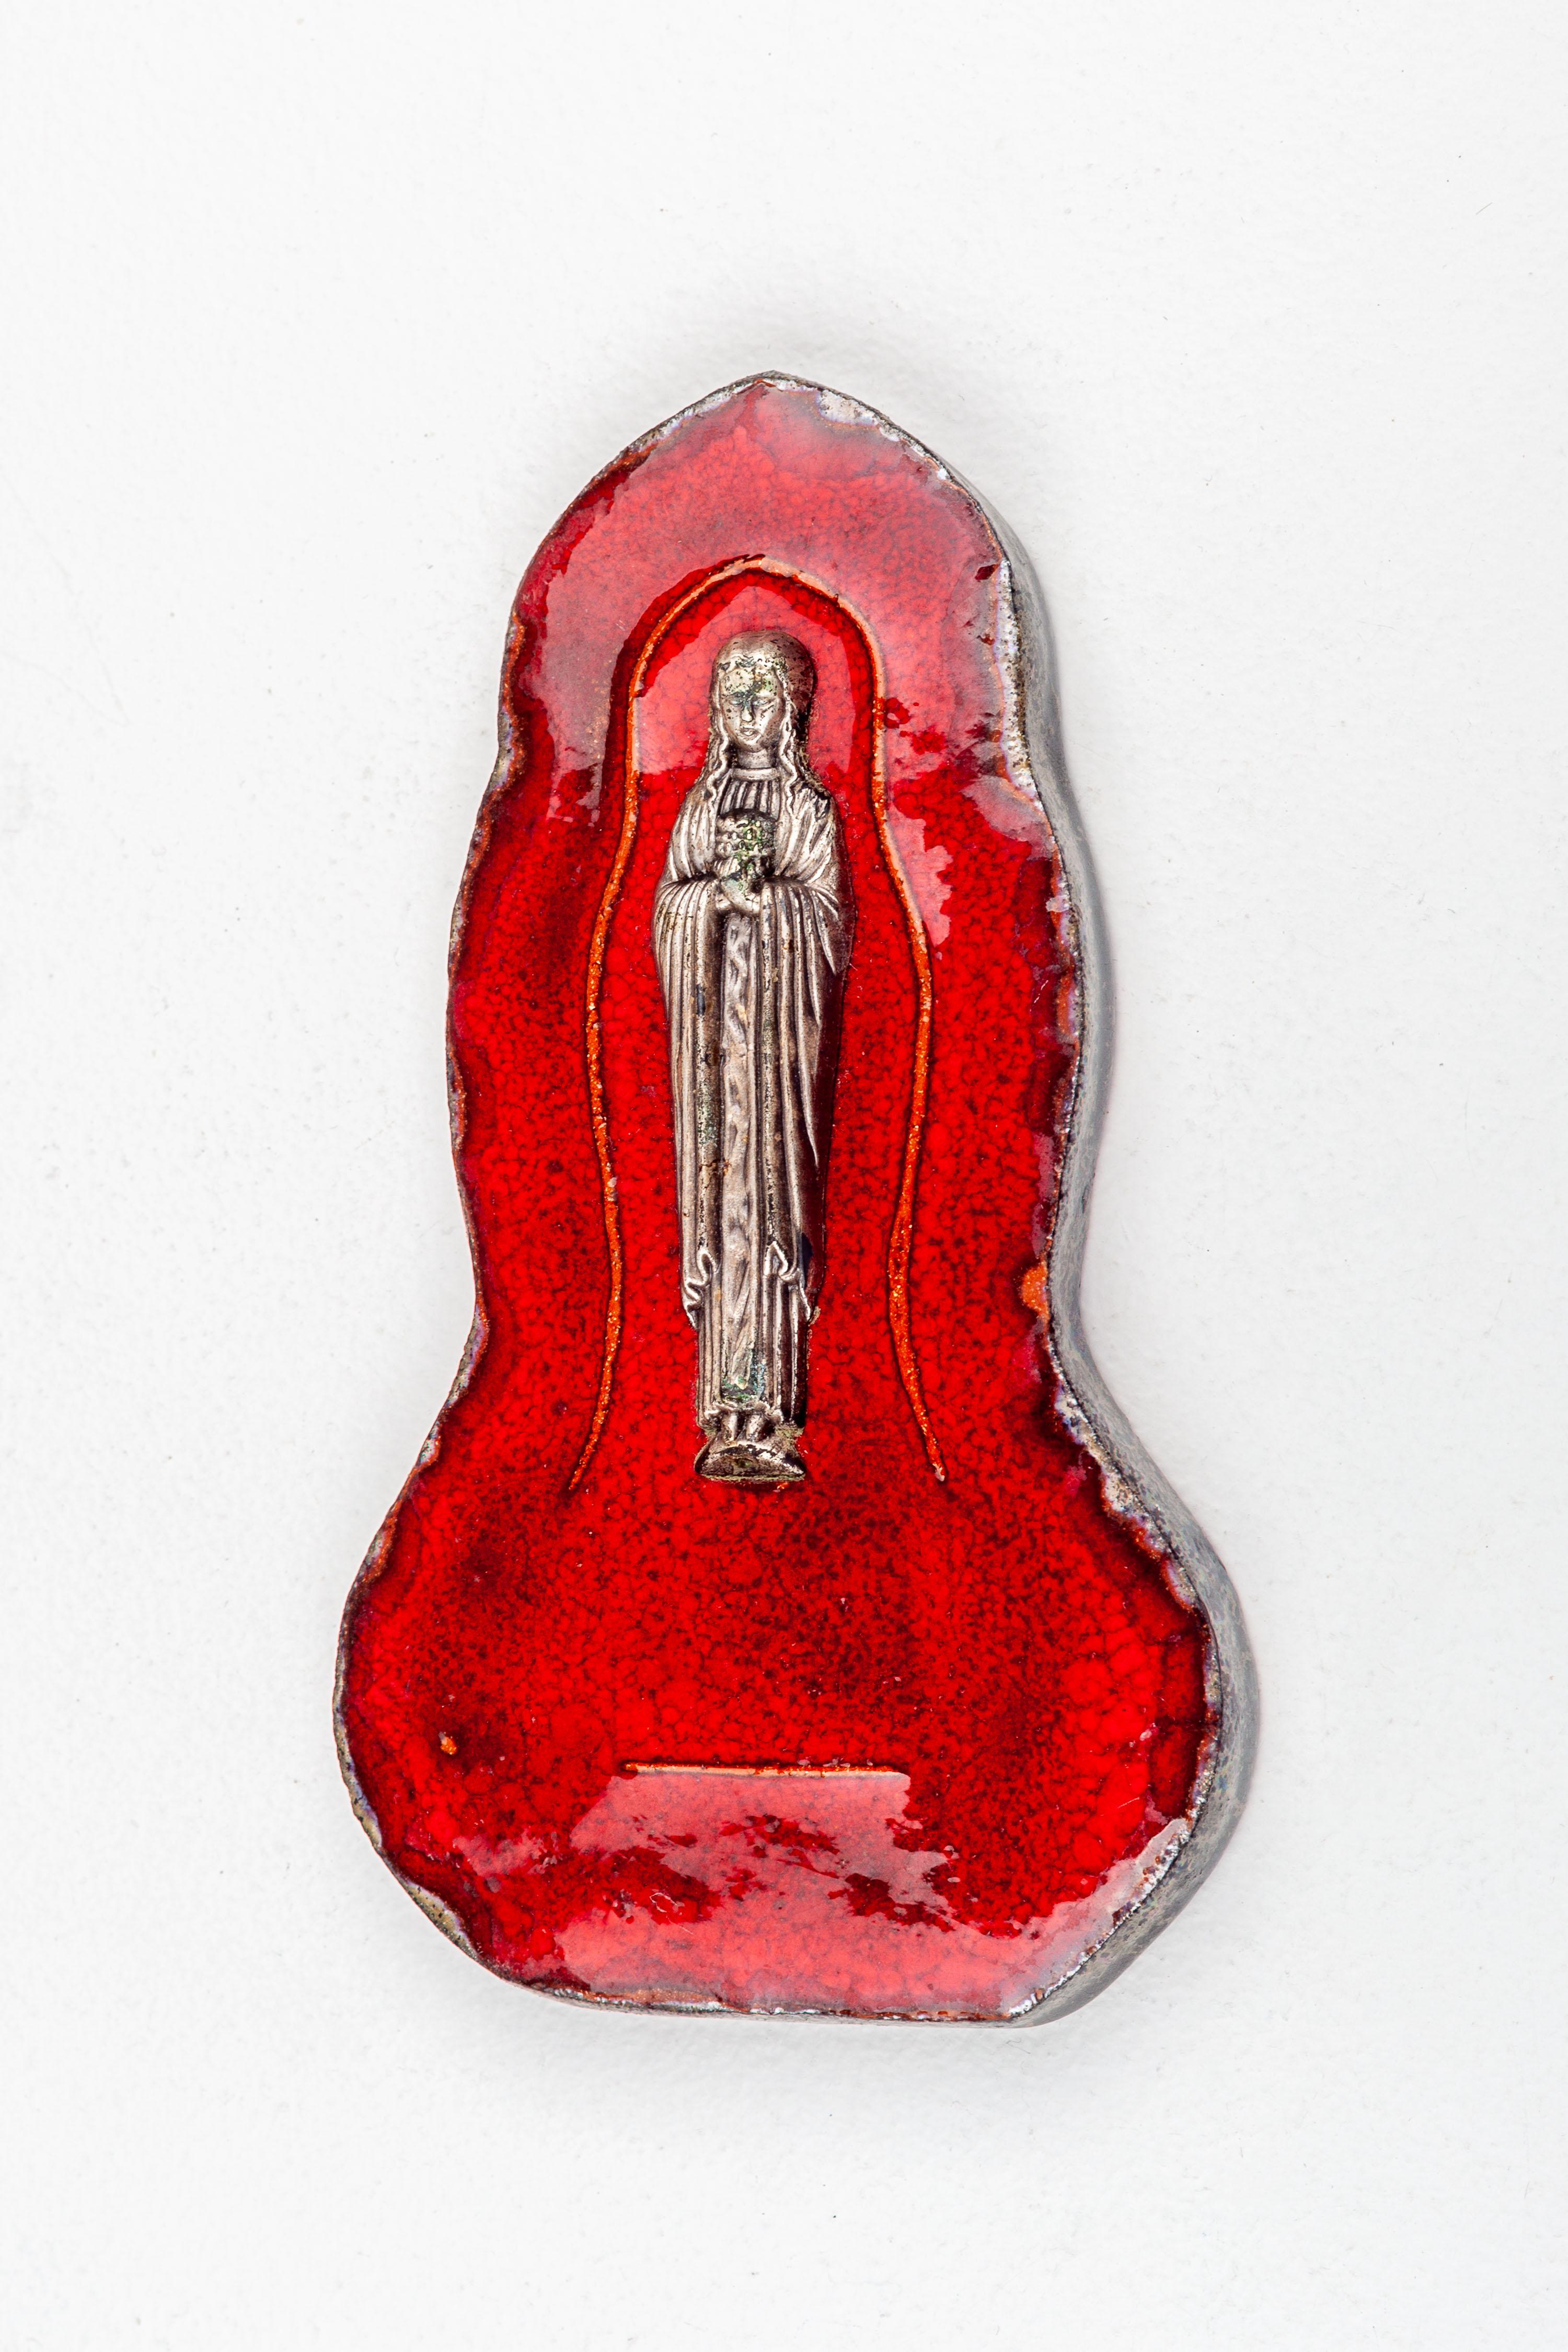 Midcentury Ceramic Wall Plaque with Metal Virgin Mary, European Studio Pottery For Sale 5